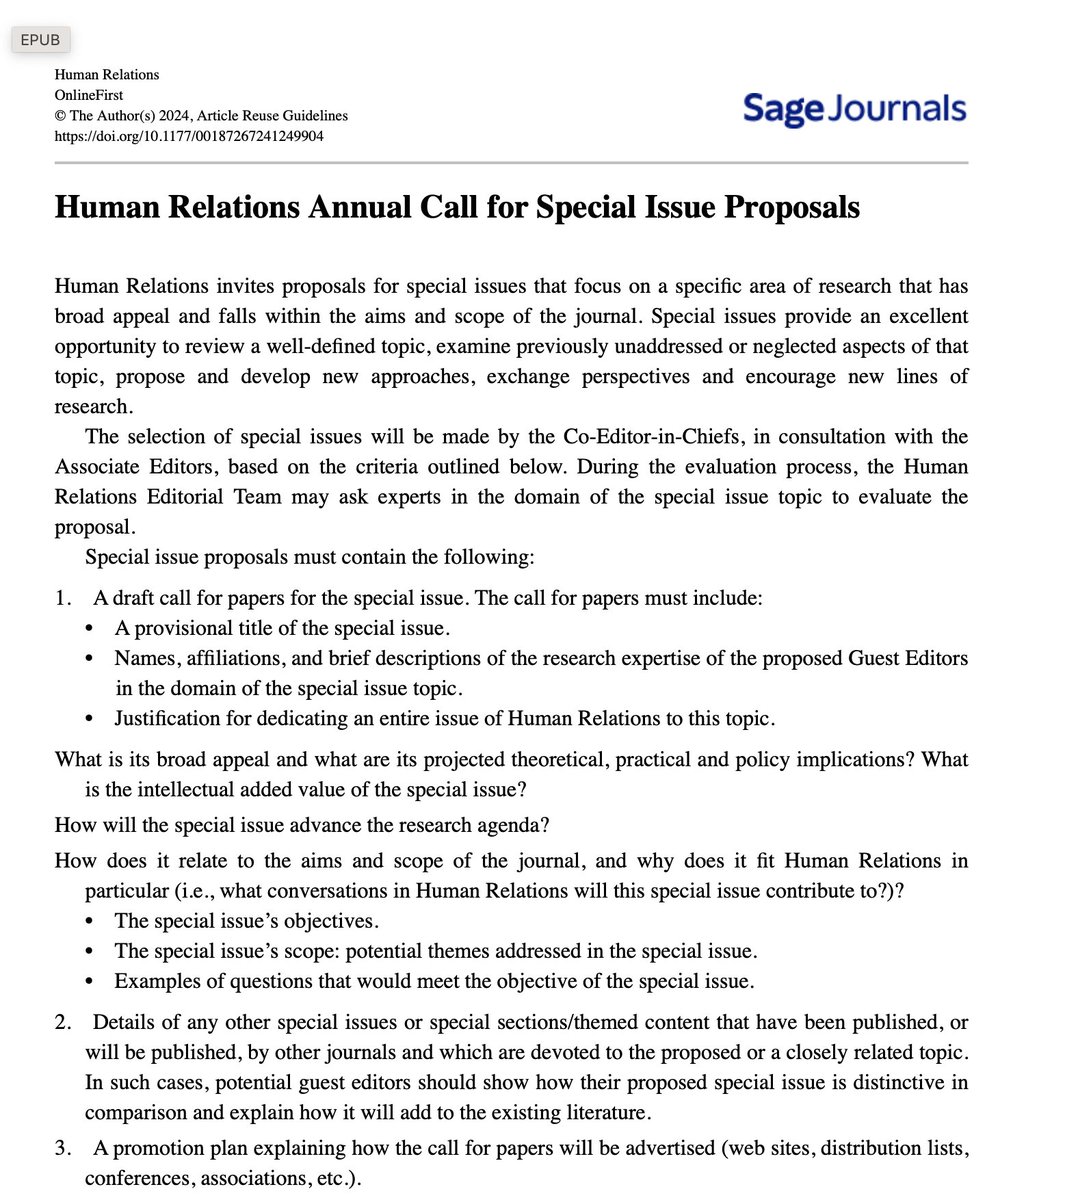 We, as Human Relations, @HR_TIHR, invite #proposals for #special #issues that focus on a specific area of research with a #broad #appeal within the aims and scope of the journal. 'Human Relations Annual Call for Special Issue Proposals' humanrelationsjournal.org @T_I_H_R